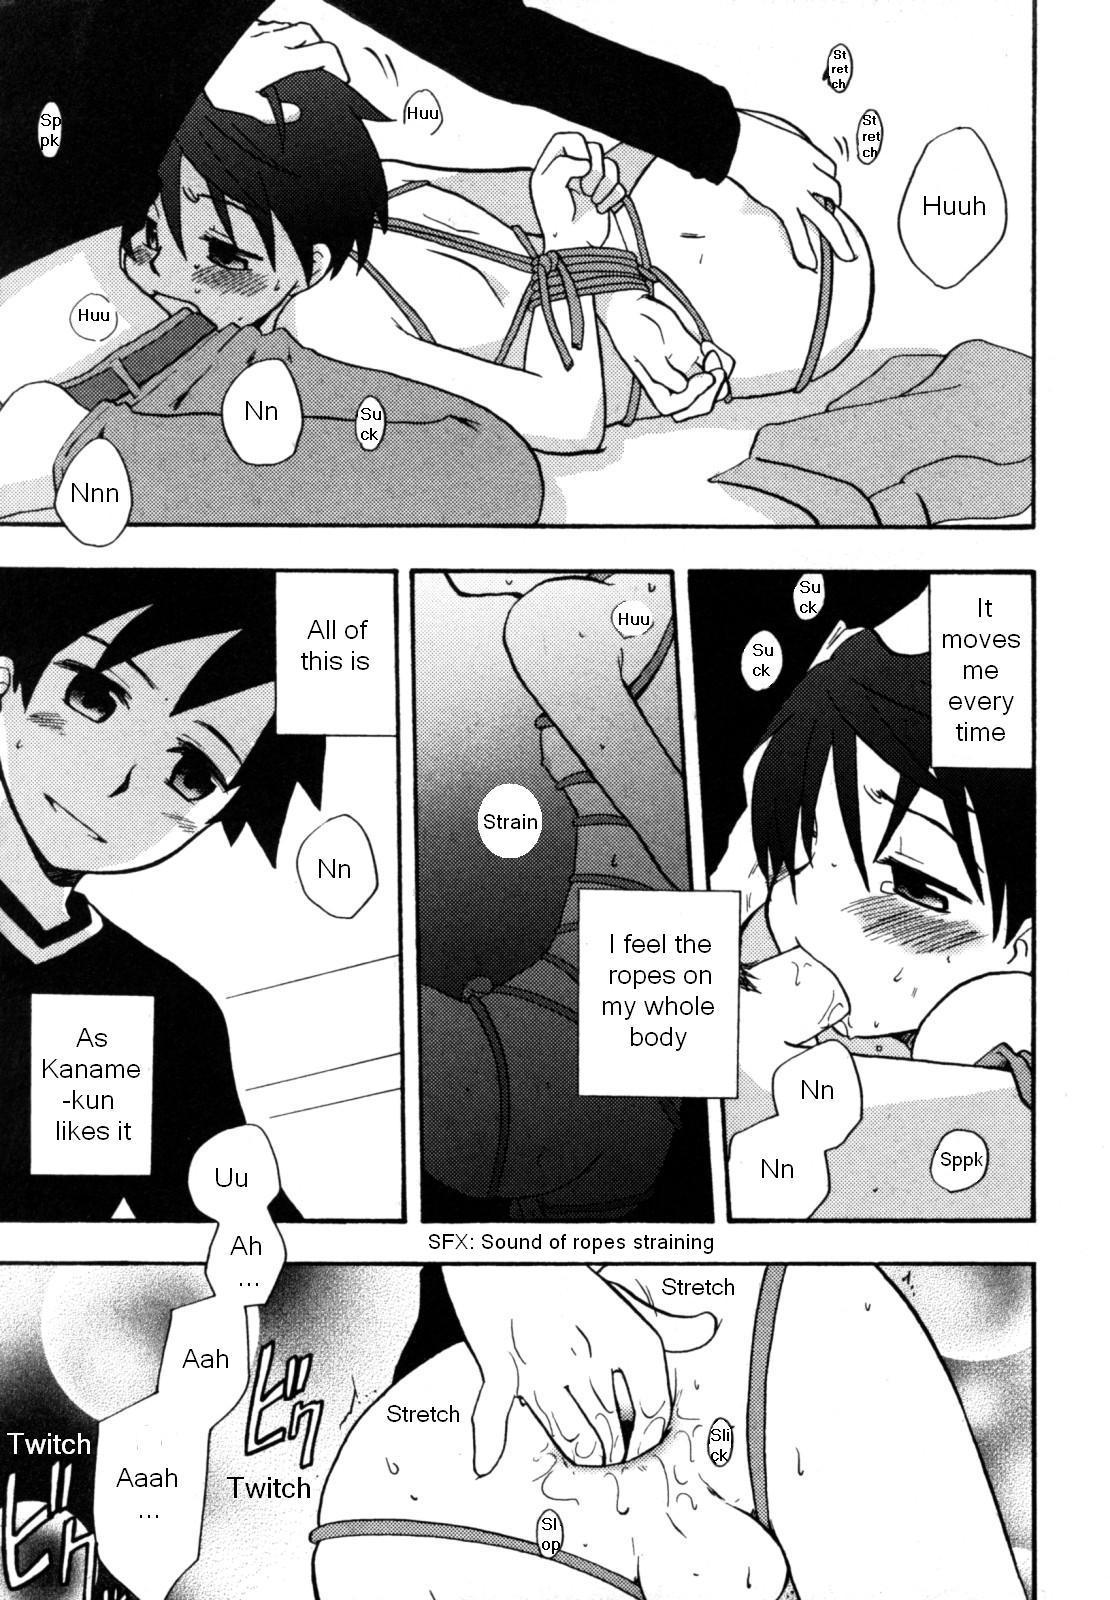 Best Blowjob The scarlet knot Big - Page 9